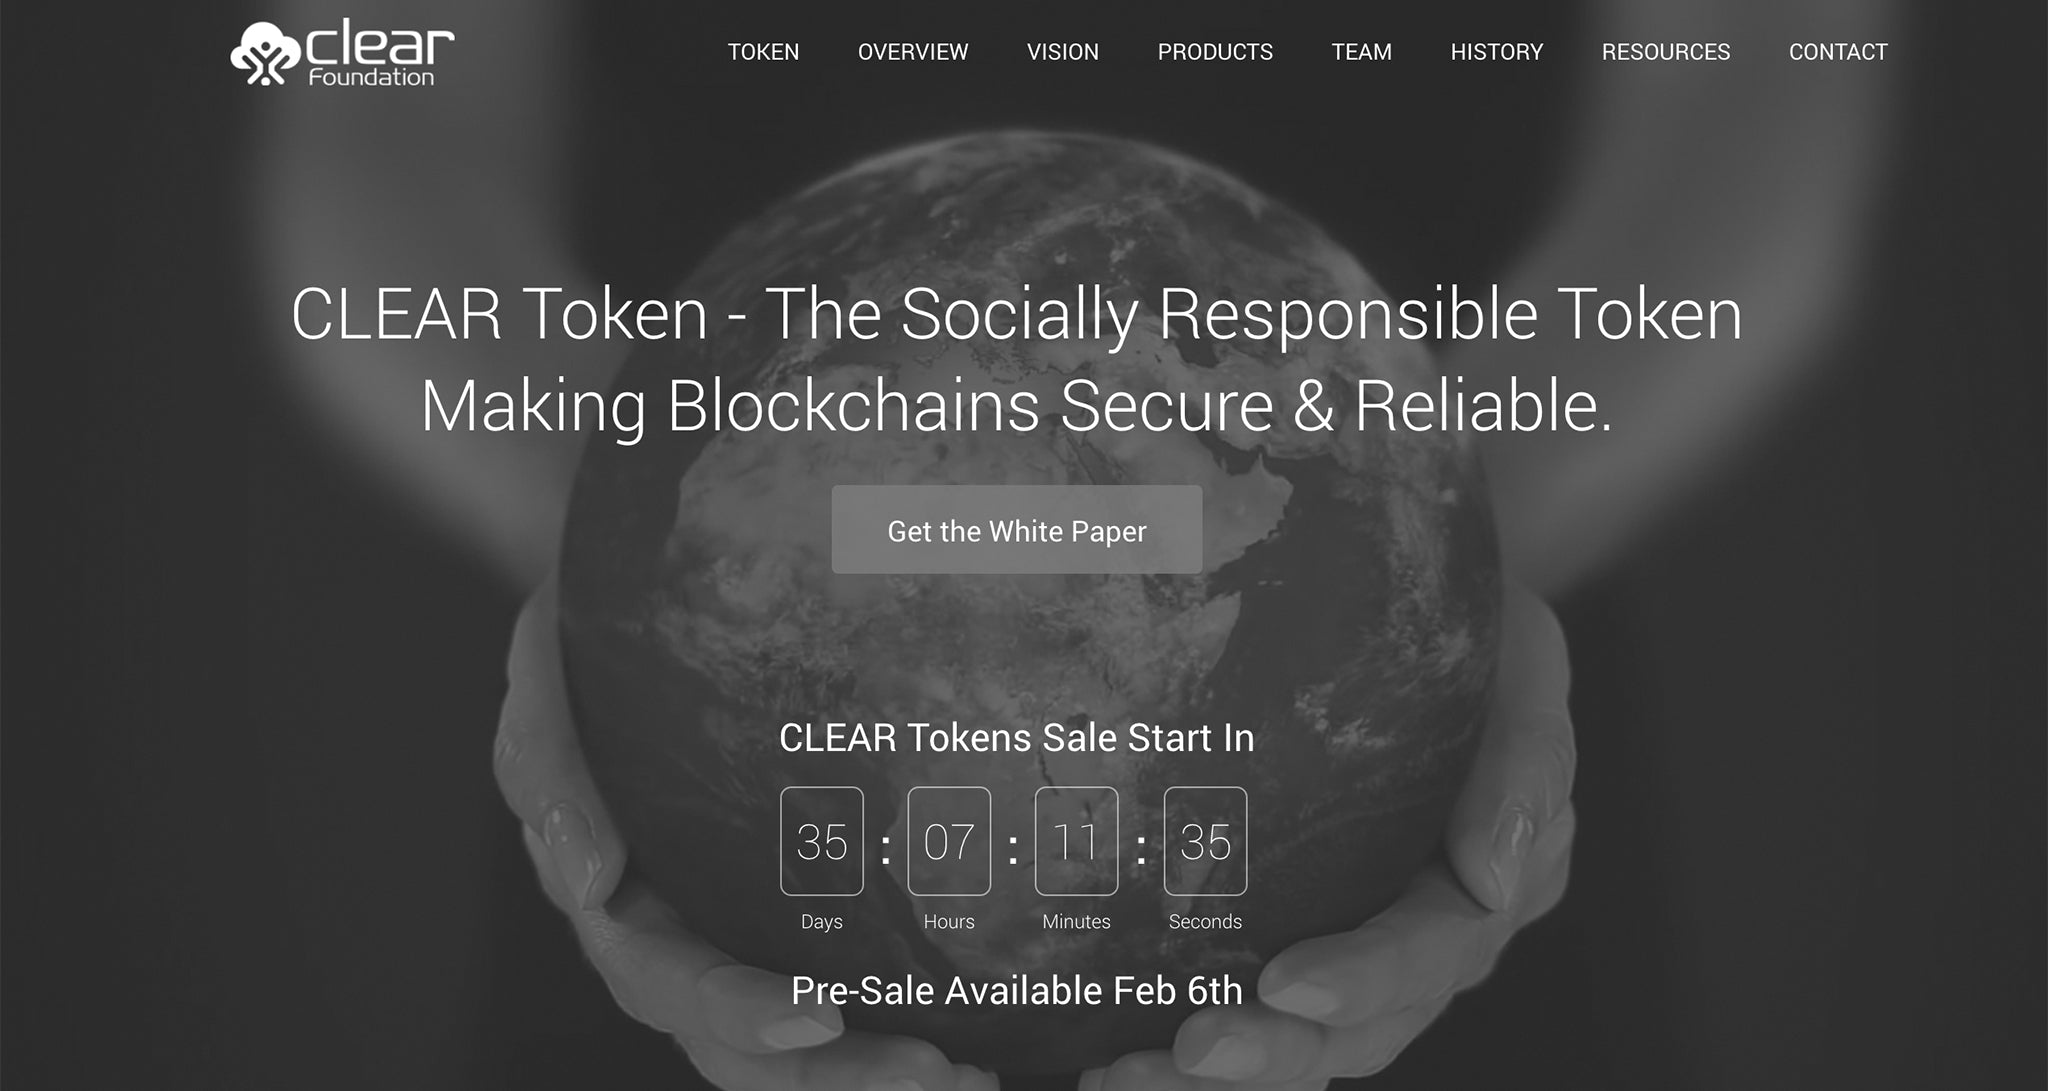 ClearFoundation Announces $1 Billion (NZD) CLEAR Token 5-Year Offering of Socially Responsible Utility Tokens